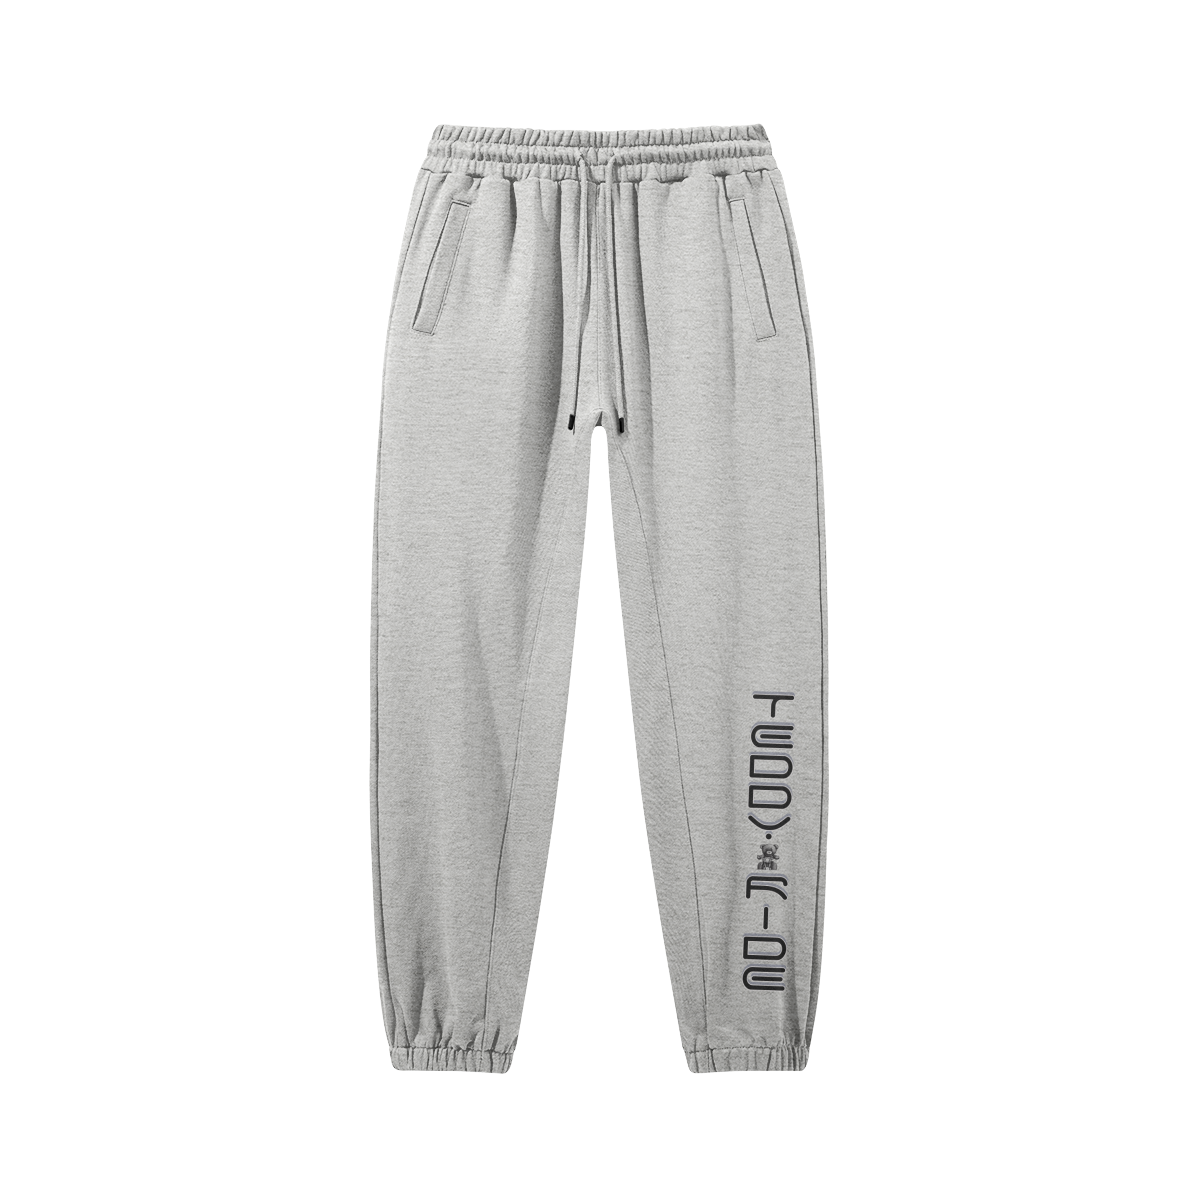 Heather Gray - Teddy Ride 380GSM Unisex Heavyweight Baggy Sweatpants - unisex sweatpants at TFC&H Co.